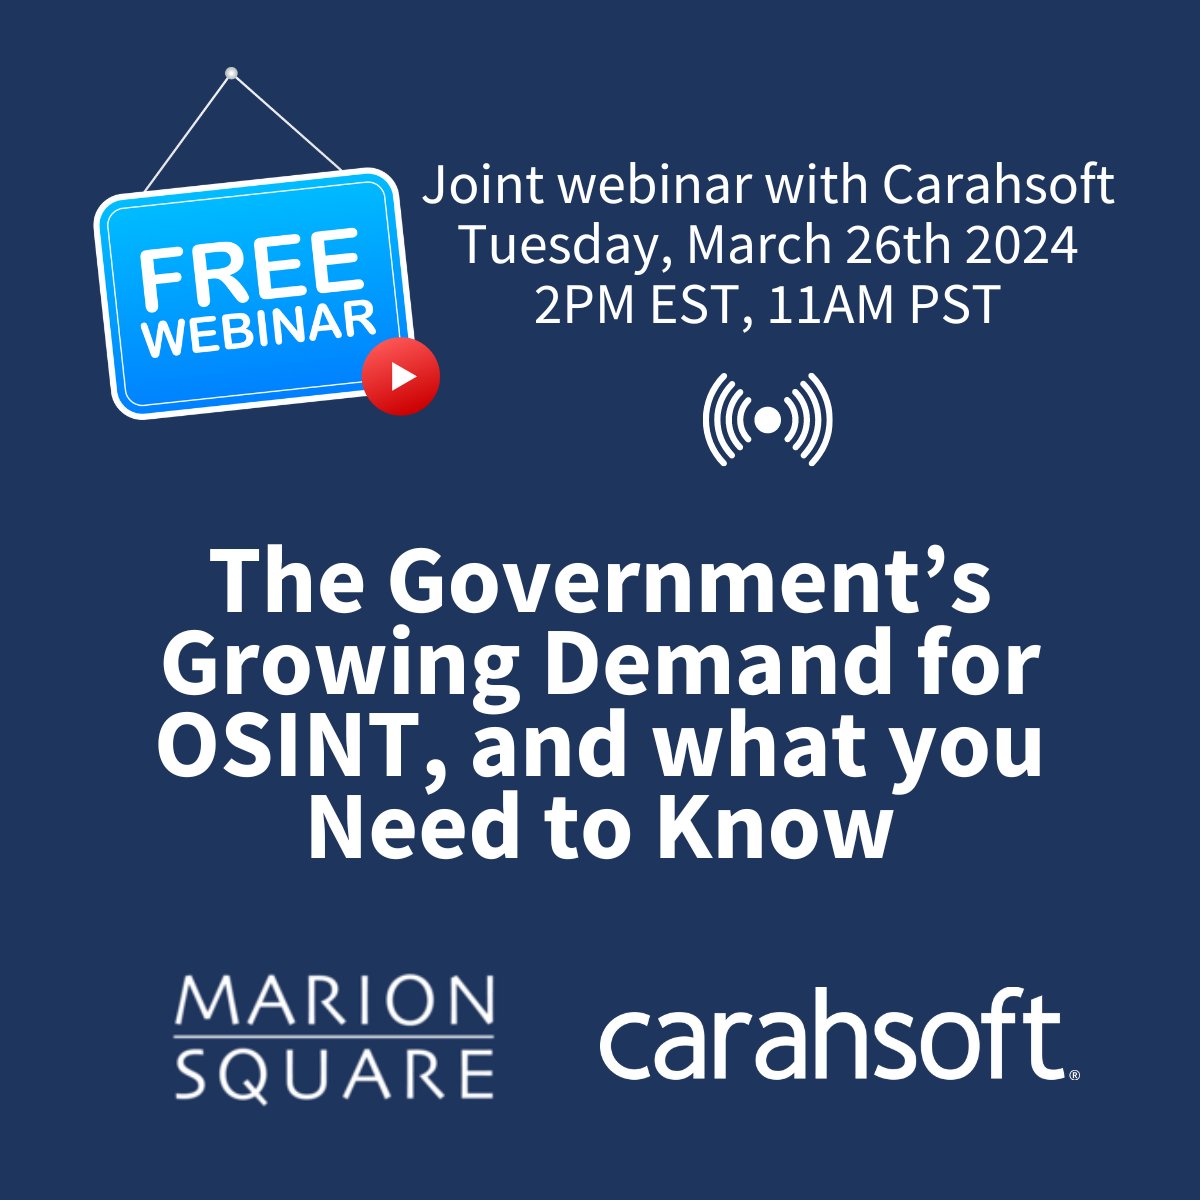 There's still time to register for our webinar with @Carahsoft - The Government's Growing Demand for OSINT, and what you need to know. Happening TOMORROW, Tuesday, March 26th, 2PM ET. Register now: loom.ly/MkZvaNY #OSINT #FreeWebinar #FederalContracting